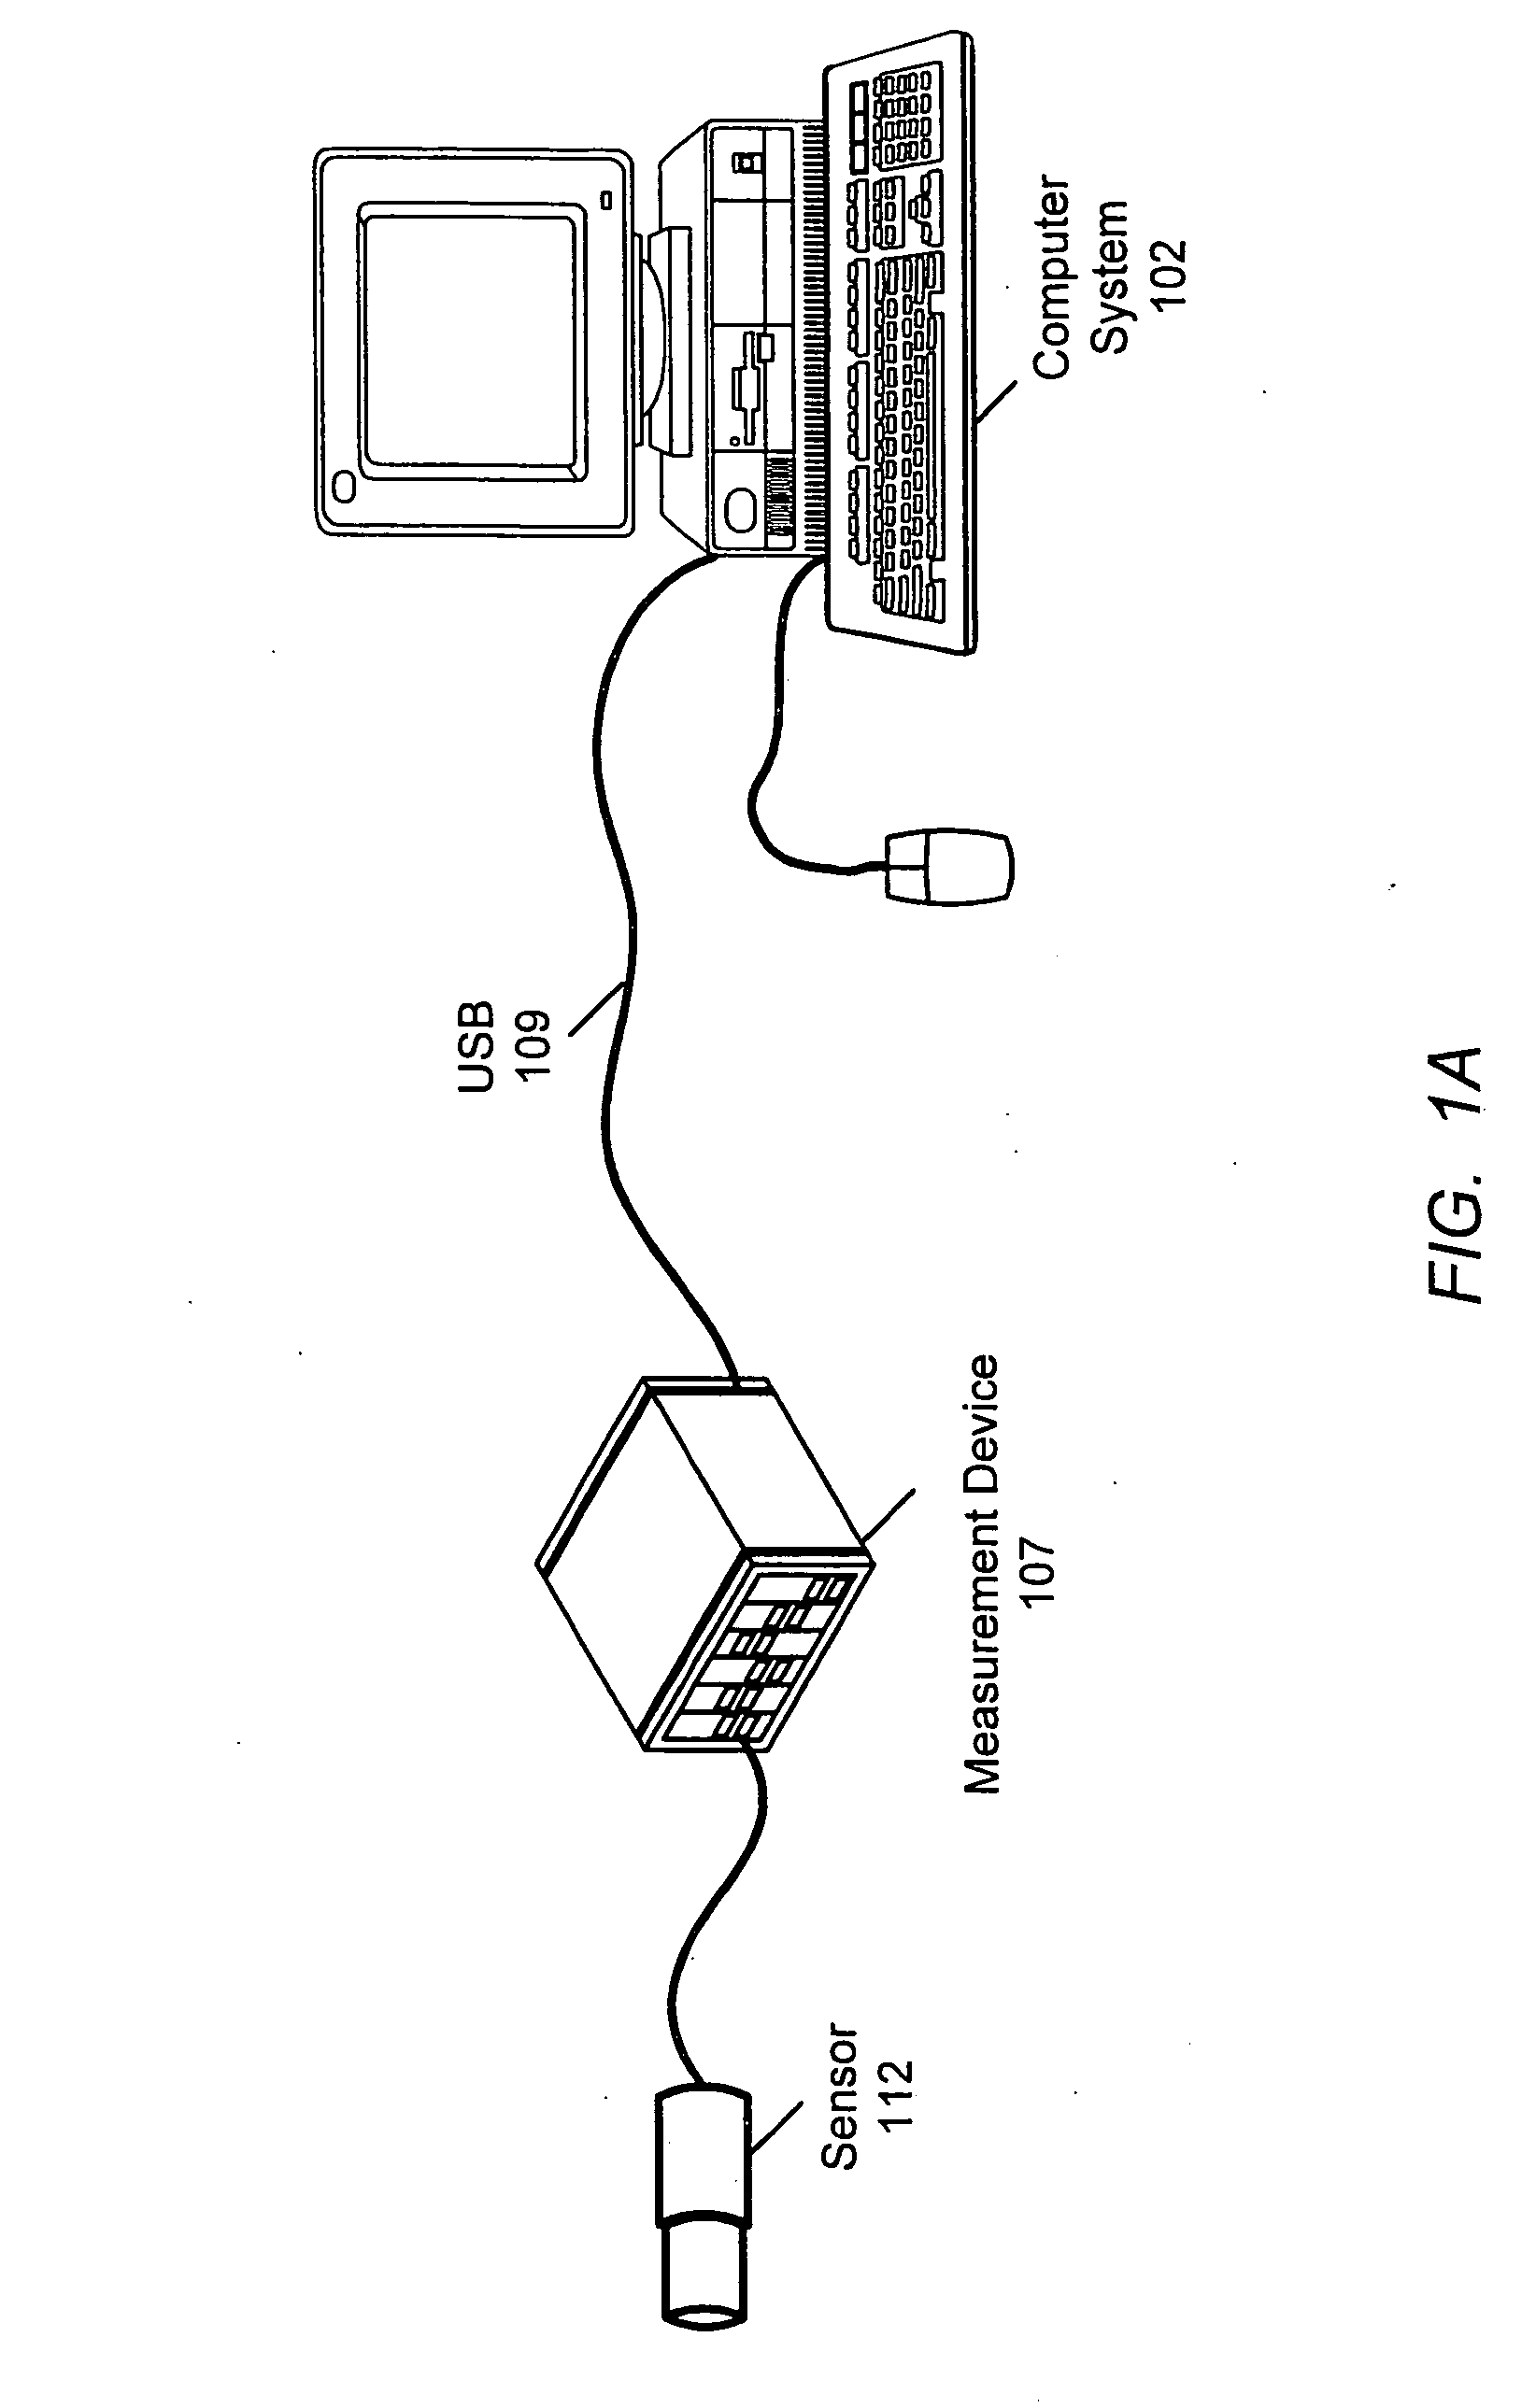 Programmable hardware element with cartridge controllers for controlling modular measurement cartridges that convey interface information